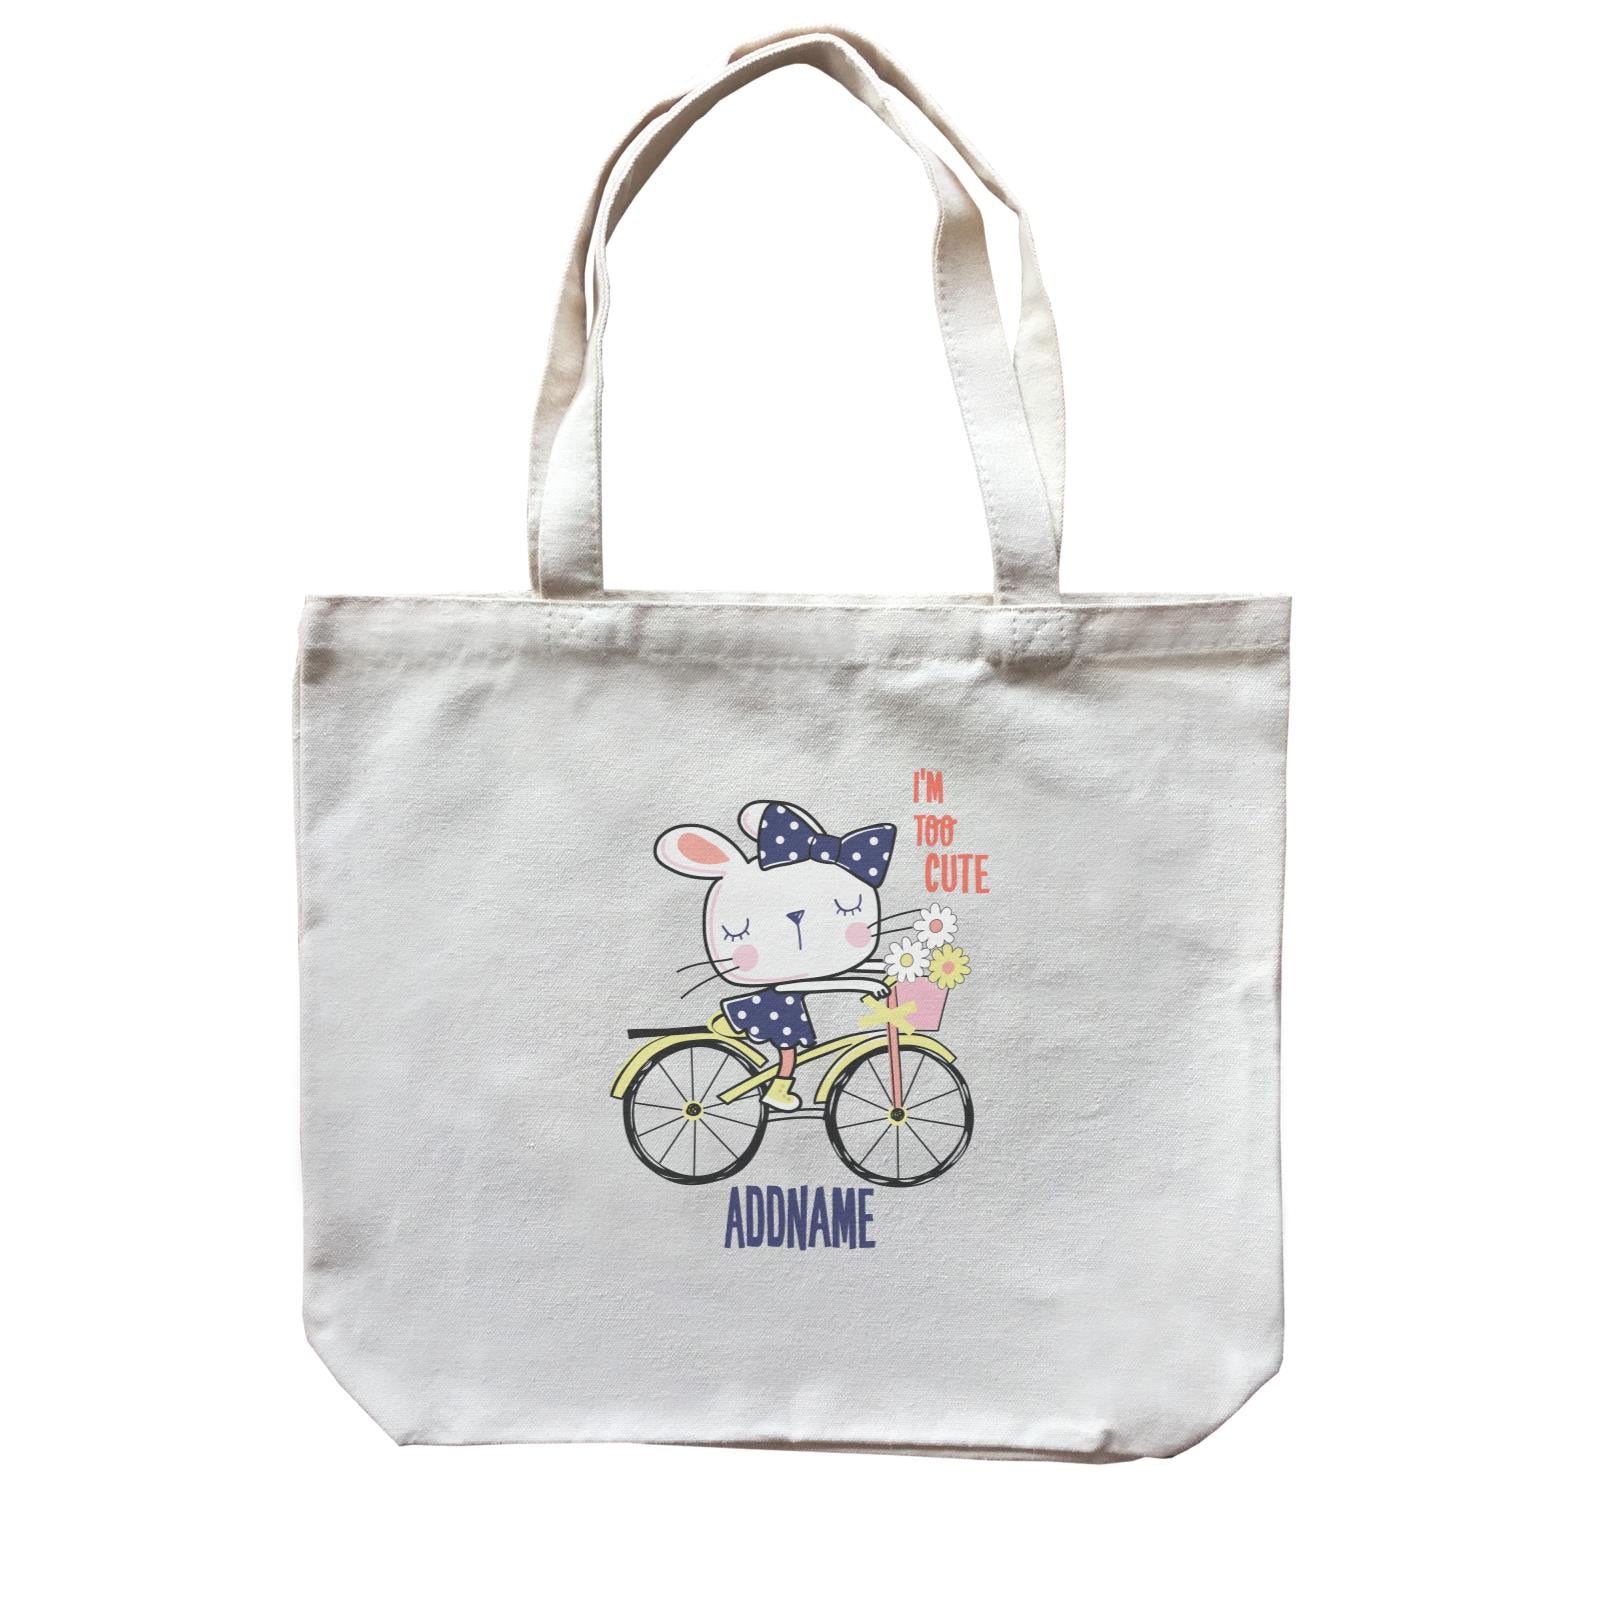 Cool Vibrant Series I'm Too Cute Bunny on Bicycle Addname Canvas Bag